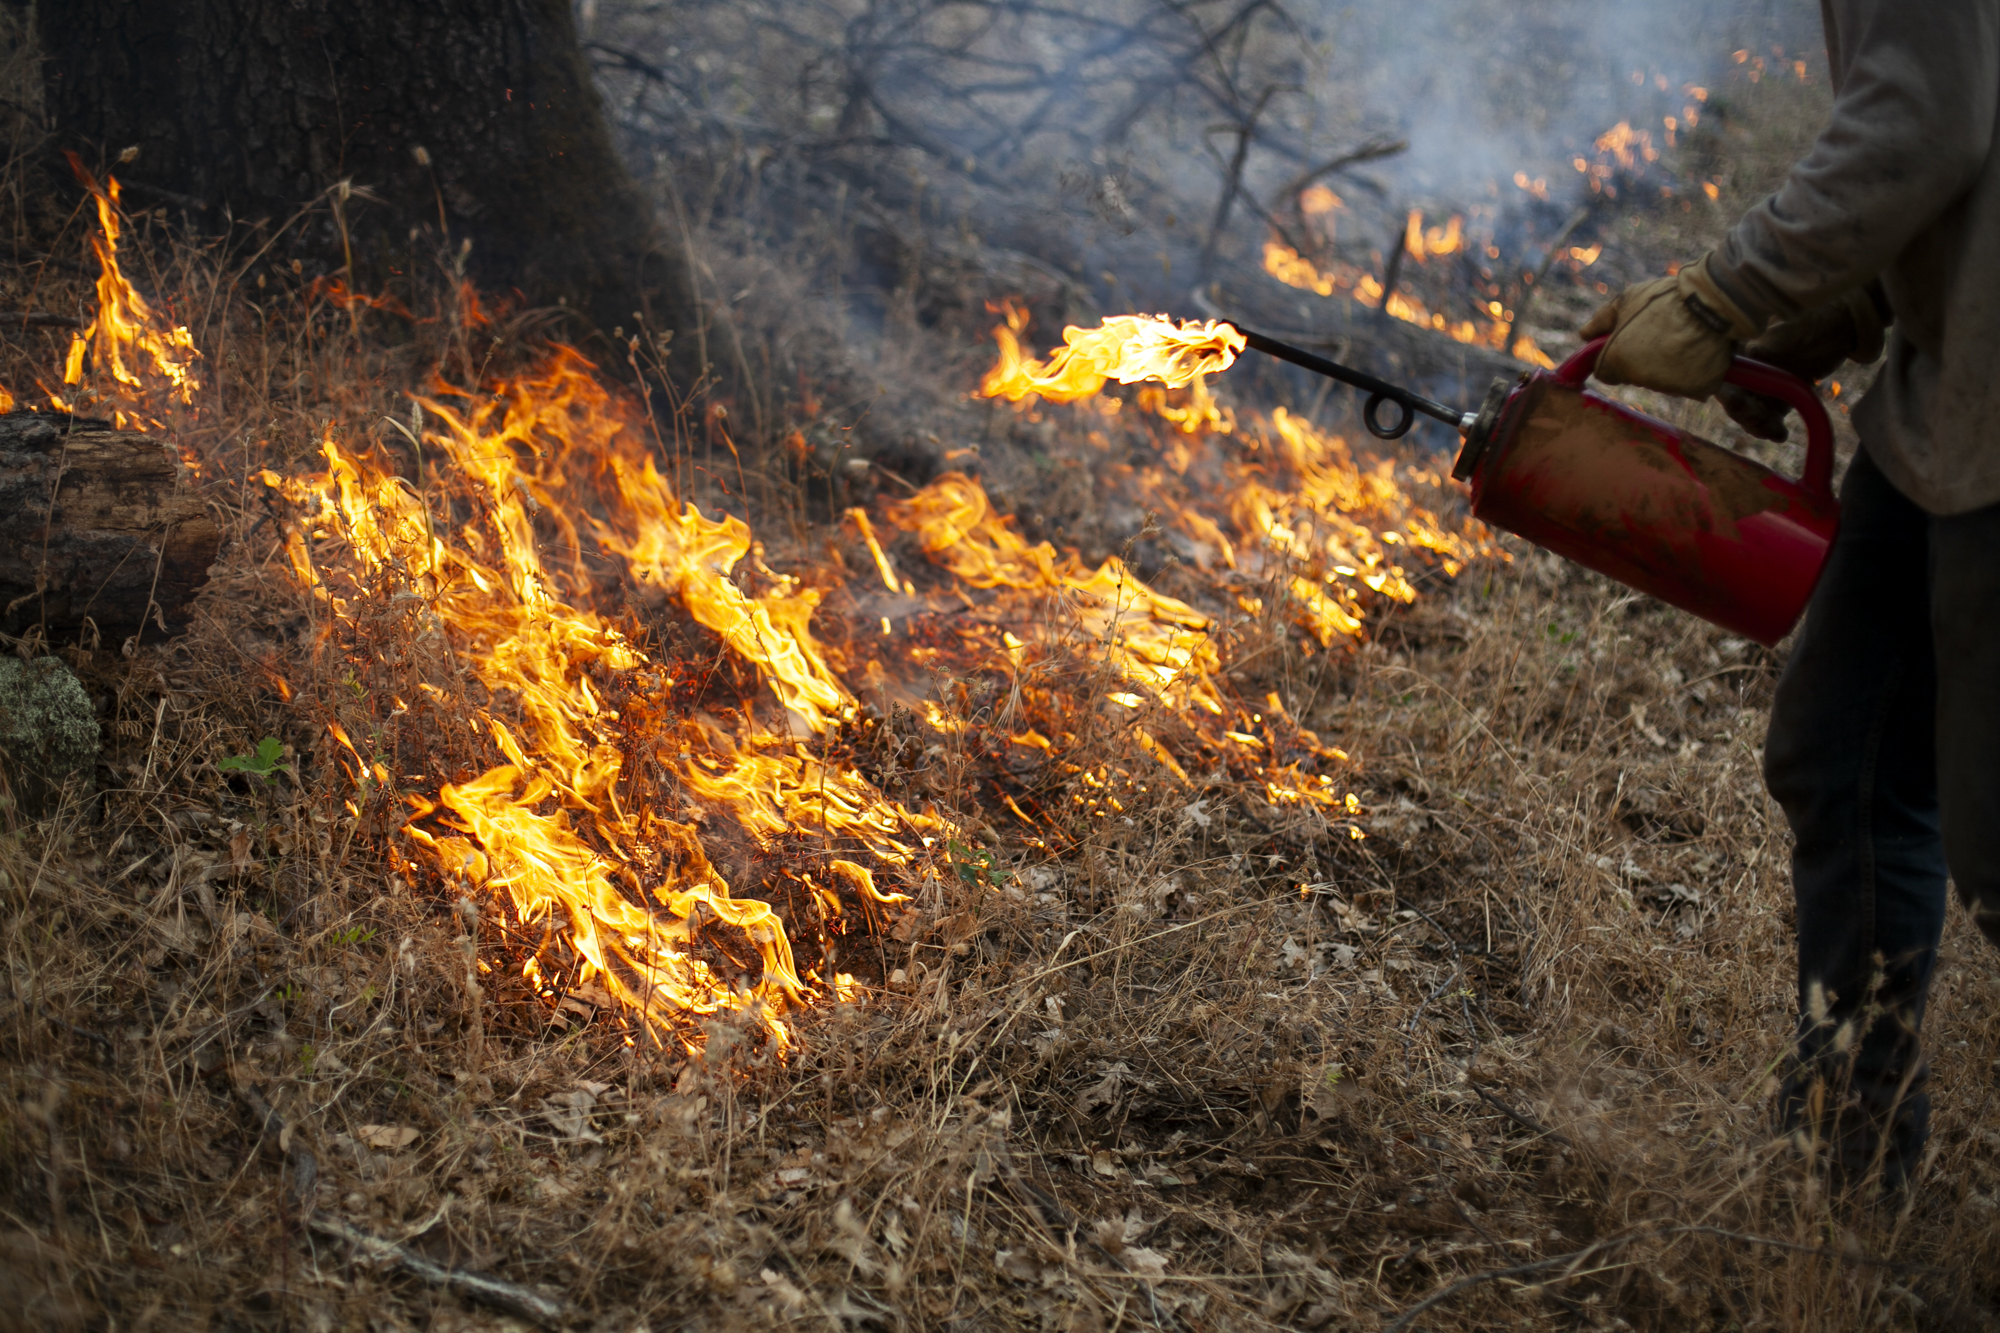 A person holds a device to dried grass to start a fire.